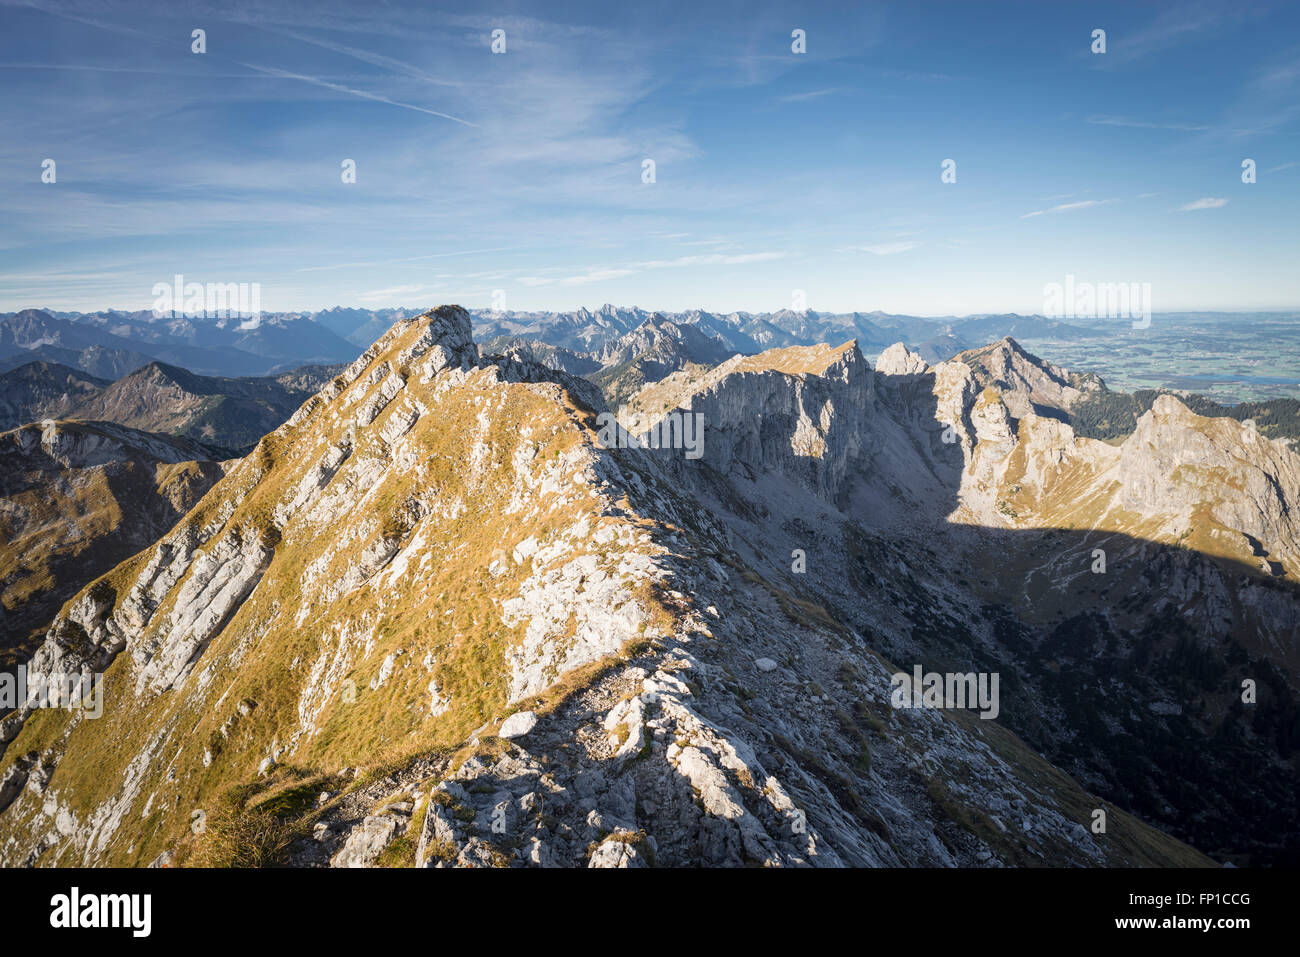 Summit ridge of Mount Hochplatte near Linderhof castle with panorama of Ammergau Alps,mountains of Lech and Tannheim valleys Stock Photo